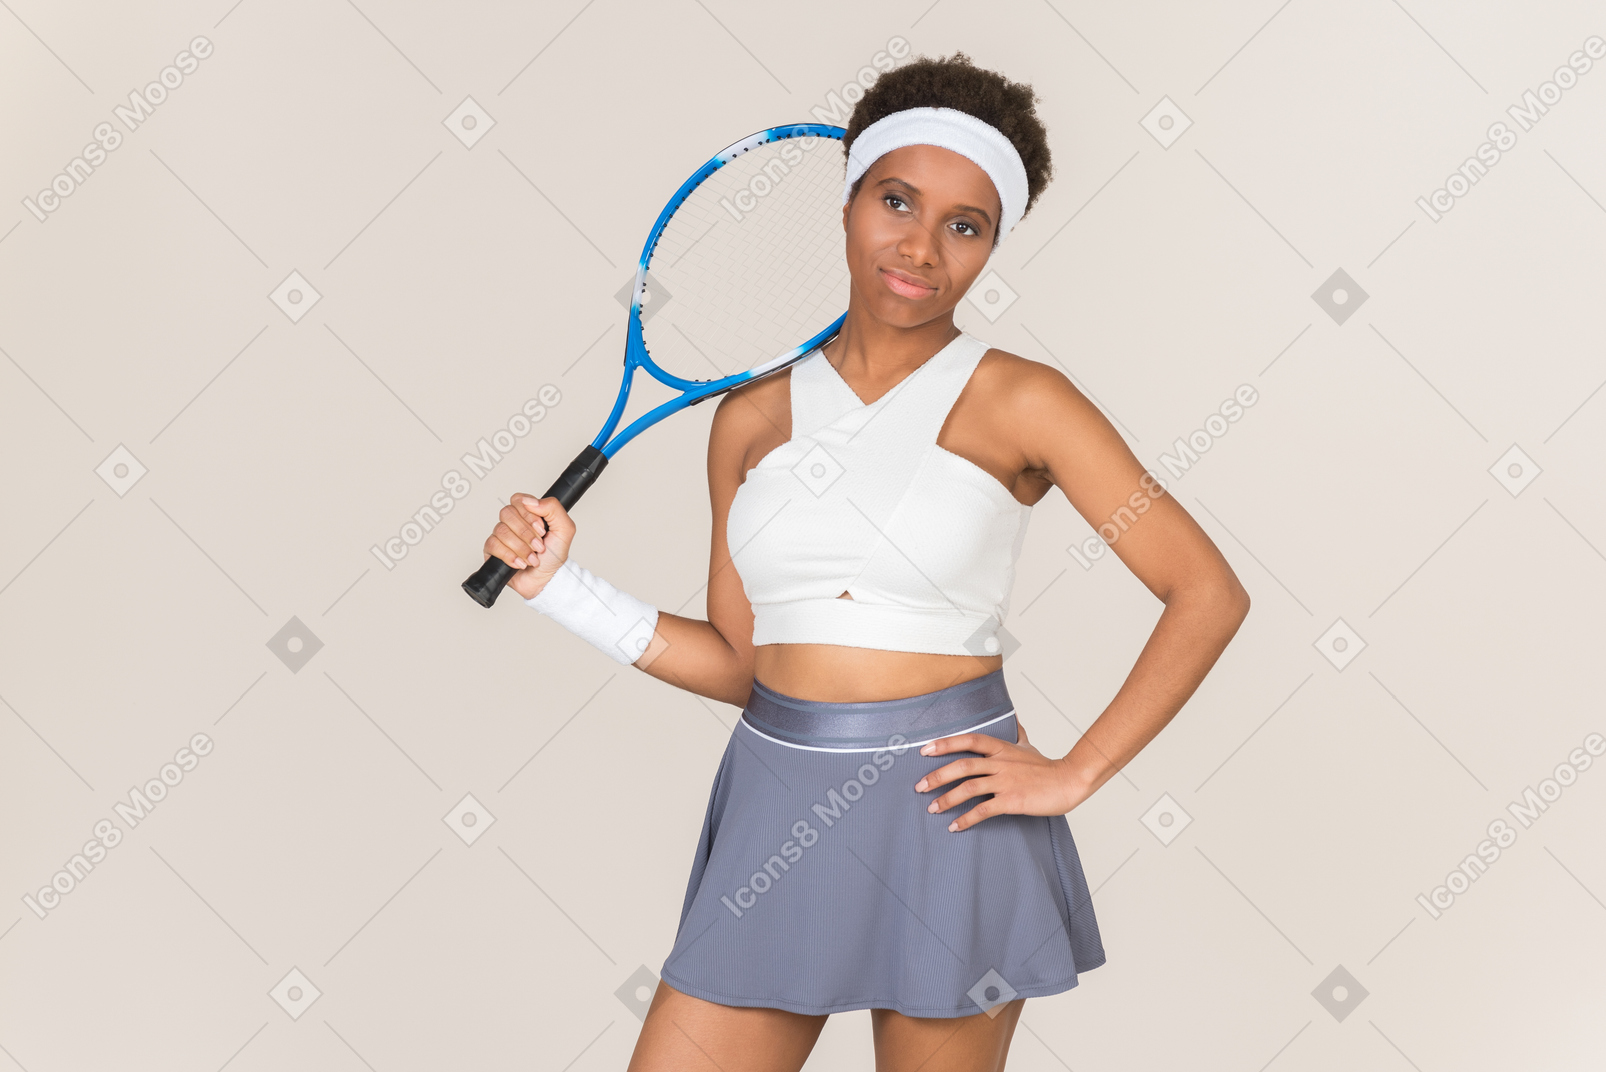 You know, i'm really great in tennis